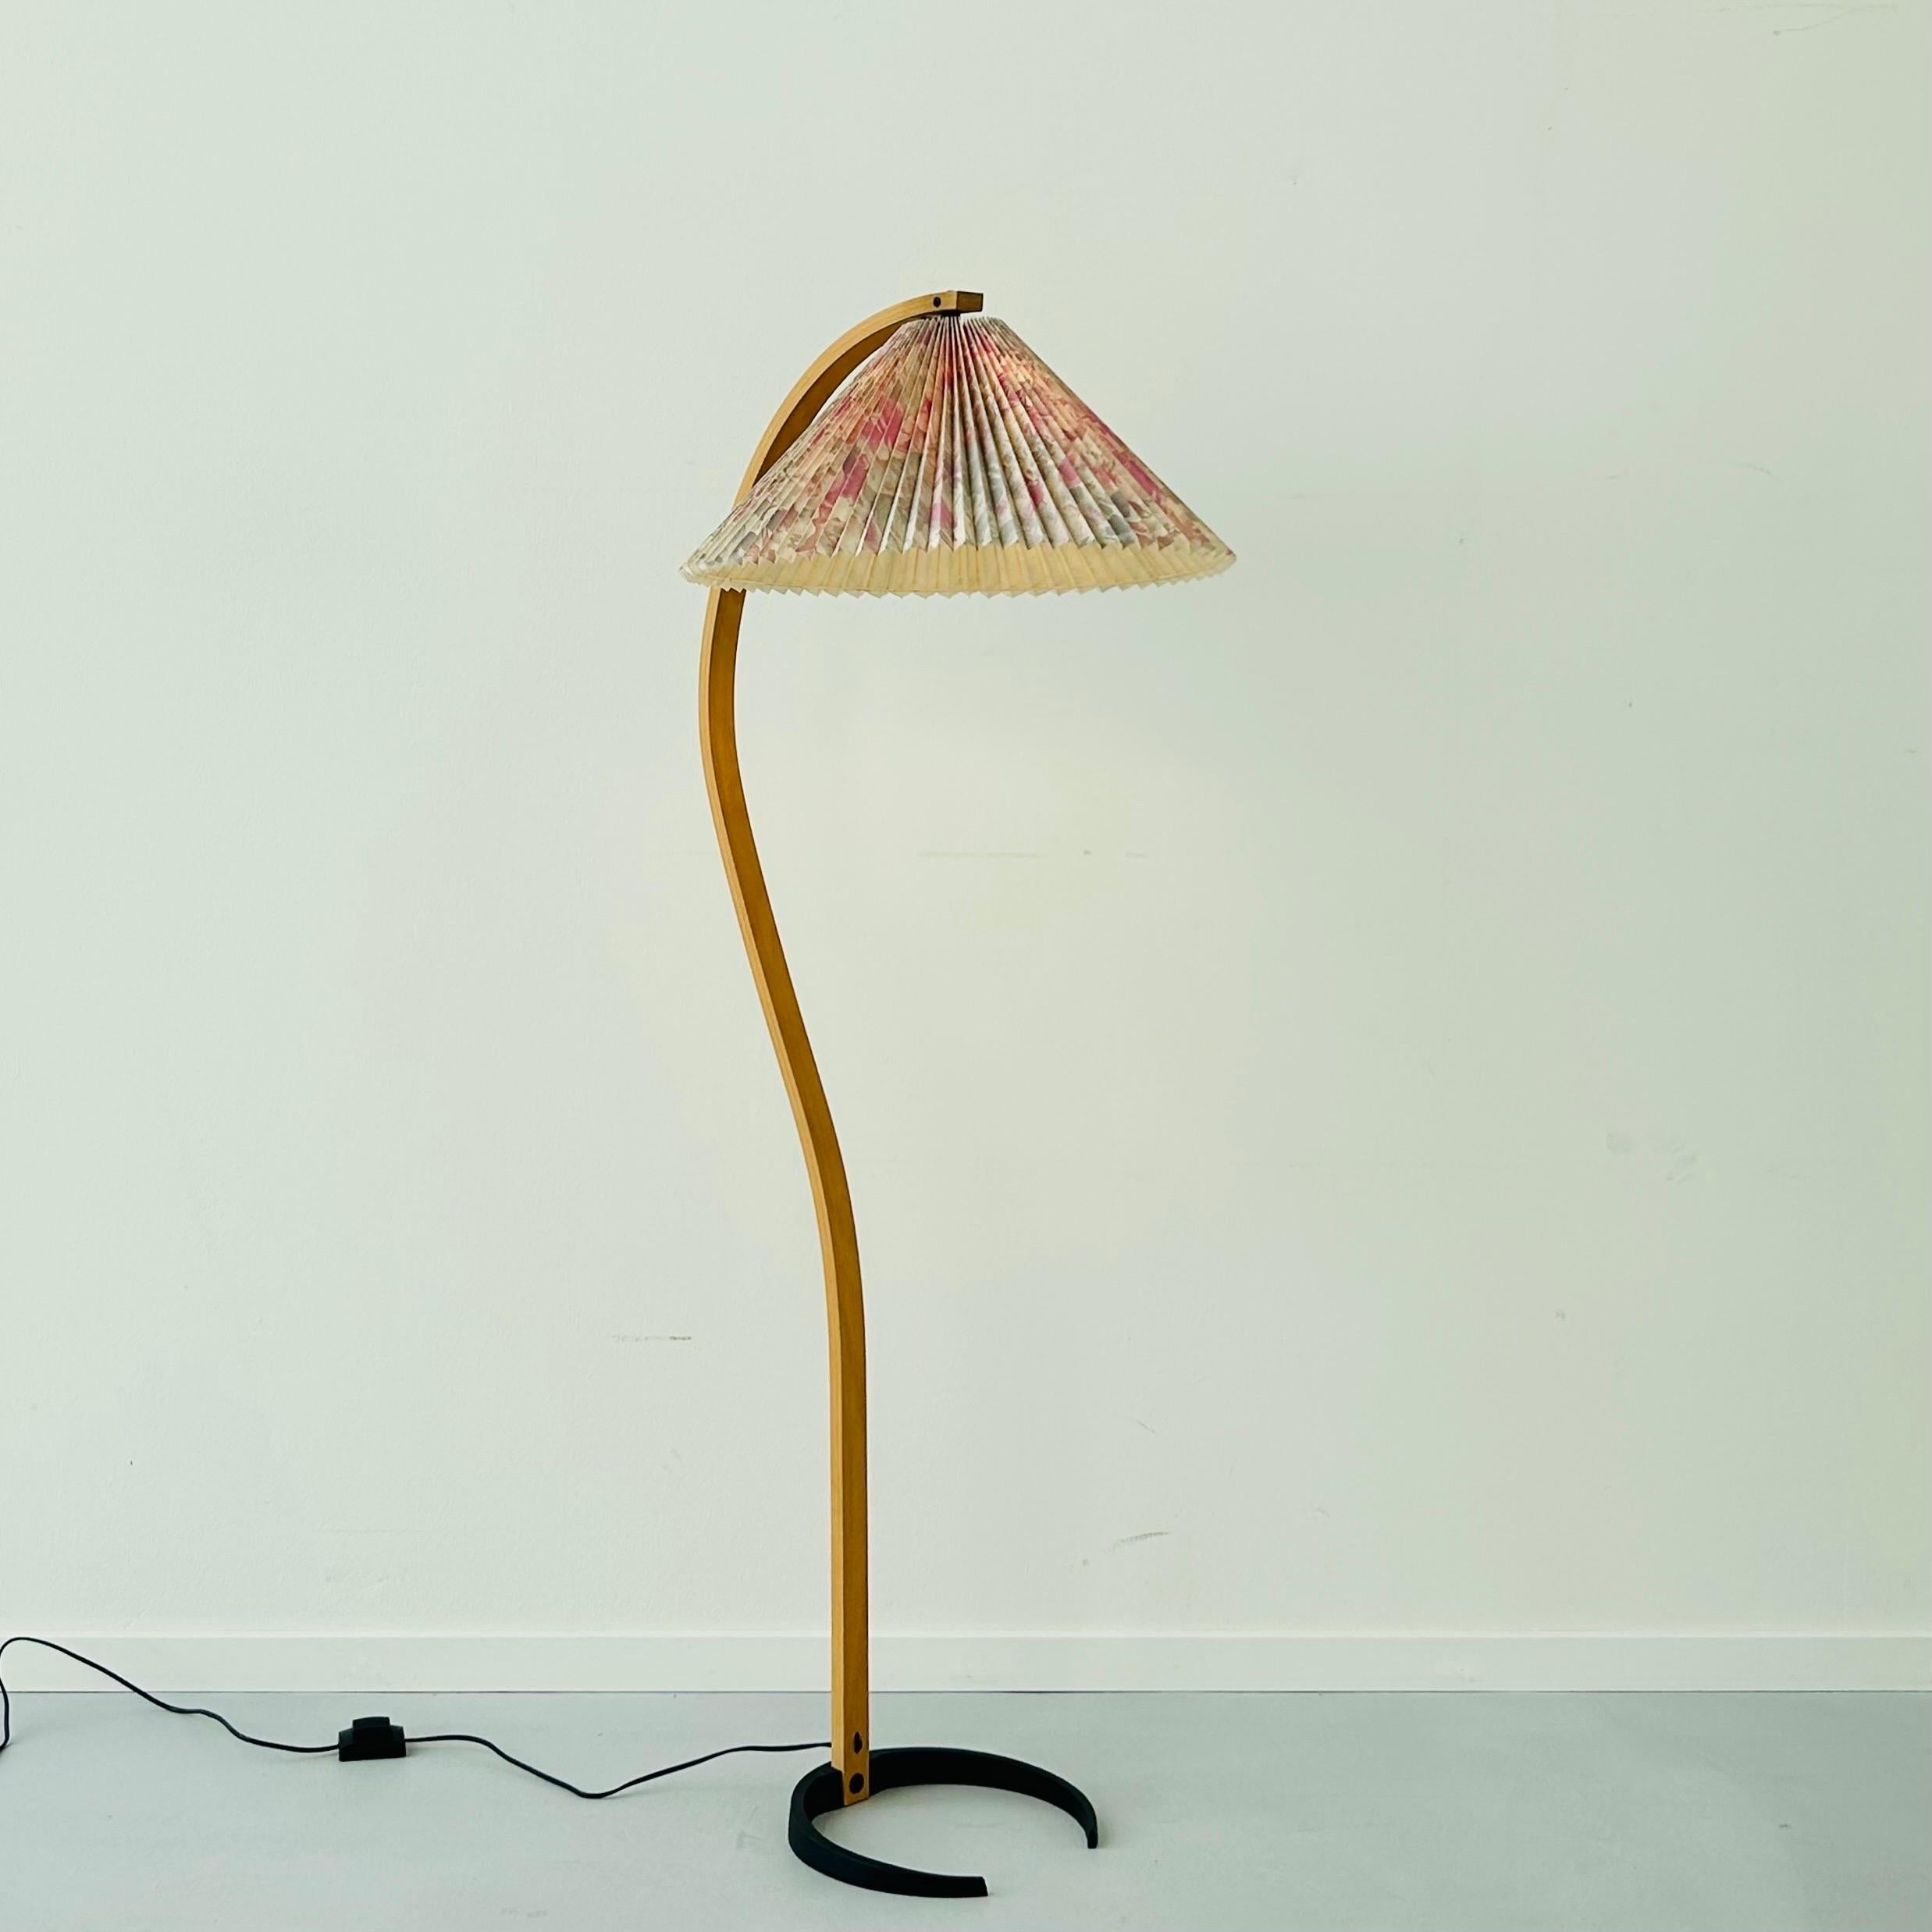 An original Timberline no. 840 floor lamp by Mads Caprani with an original flower-printed shade. 

Crafted from beautiful beech veneer, this curvy floor lamp has become one of those rare pieces that seamlessly blend into any space, regardless of